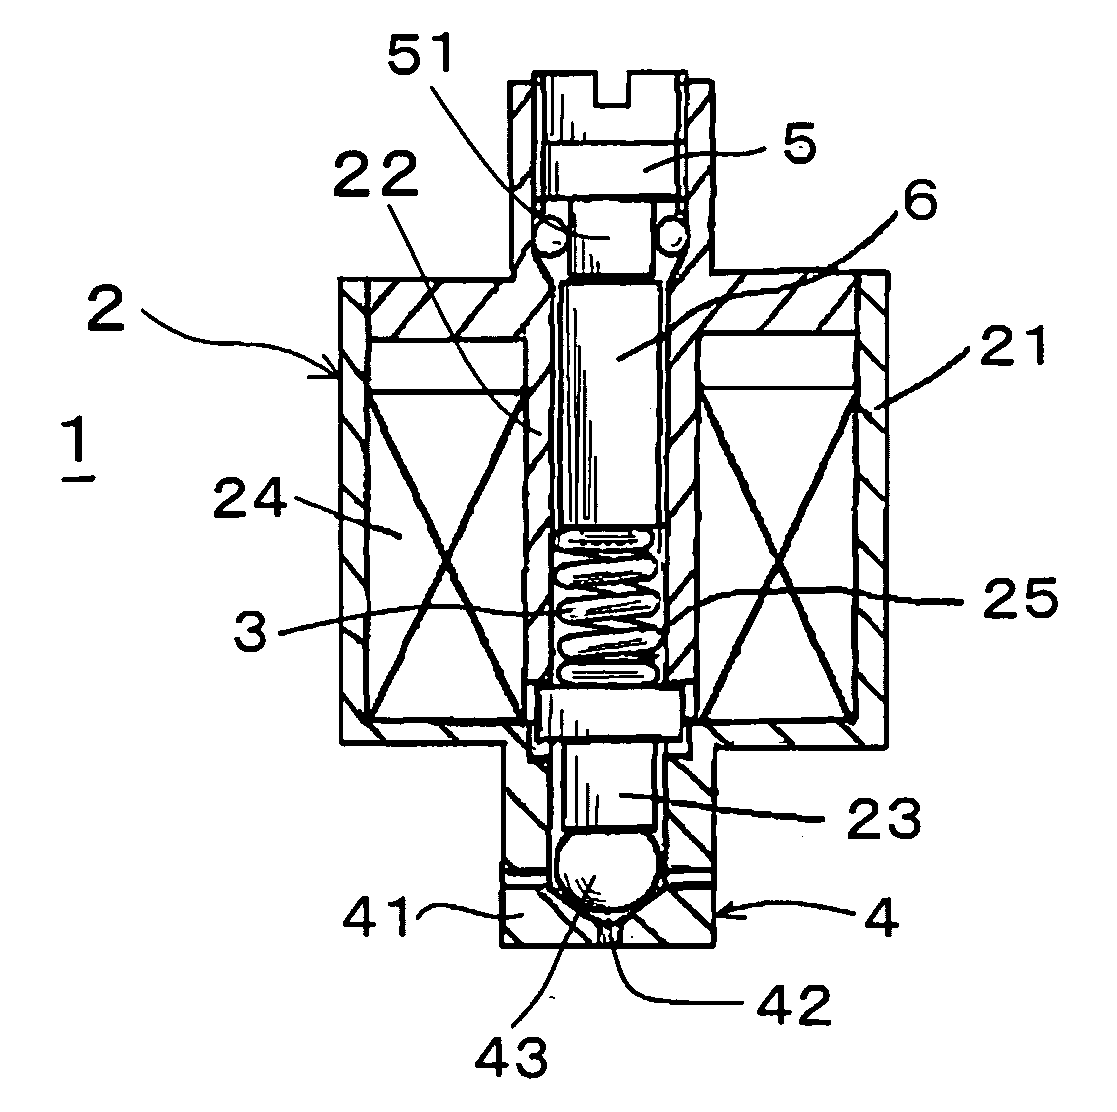 Electromagnetic fuel injection valve